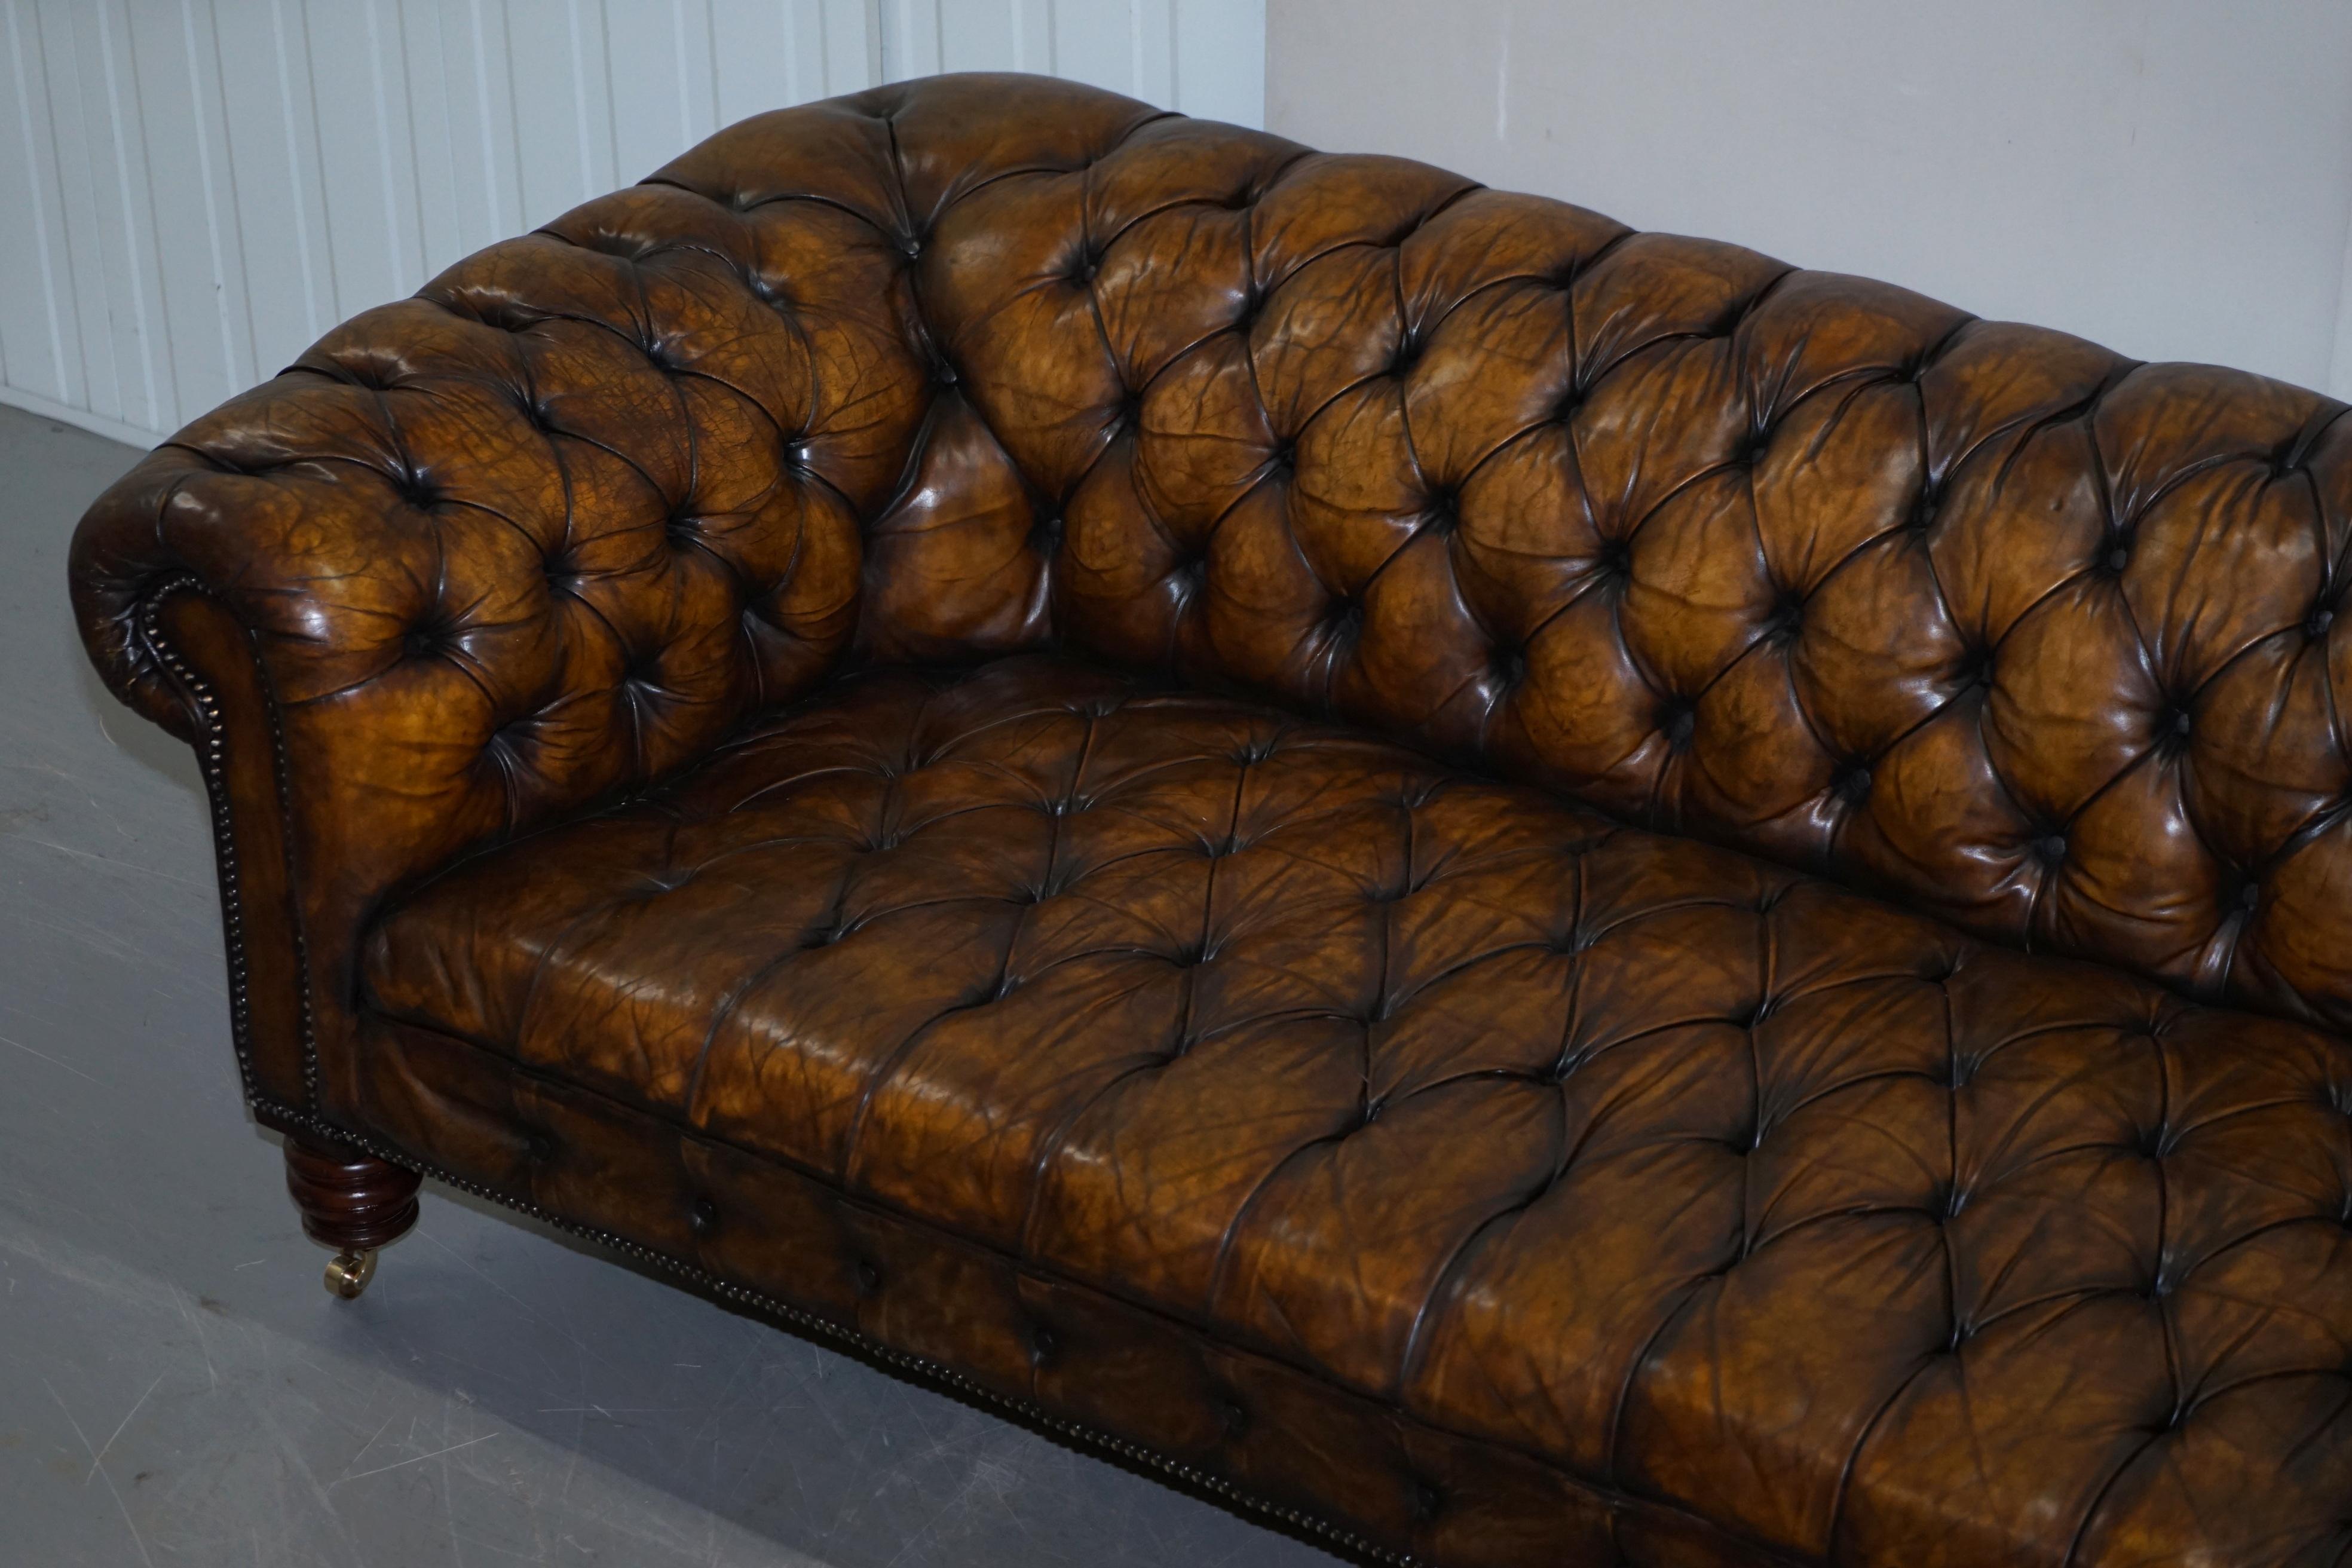 High Victorian Huge Restored Victorian Chesterfield Brown Leather Sofa Horse Hair Coil Sprung